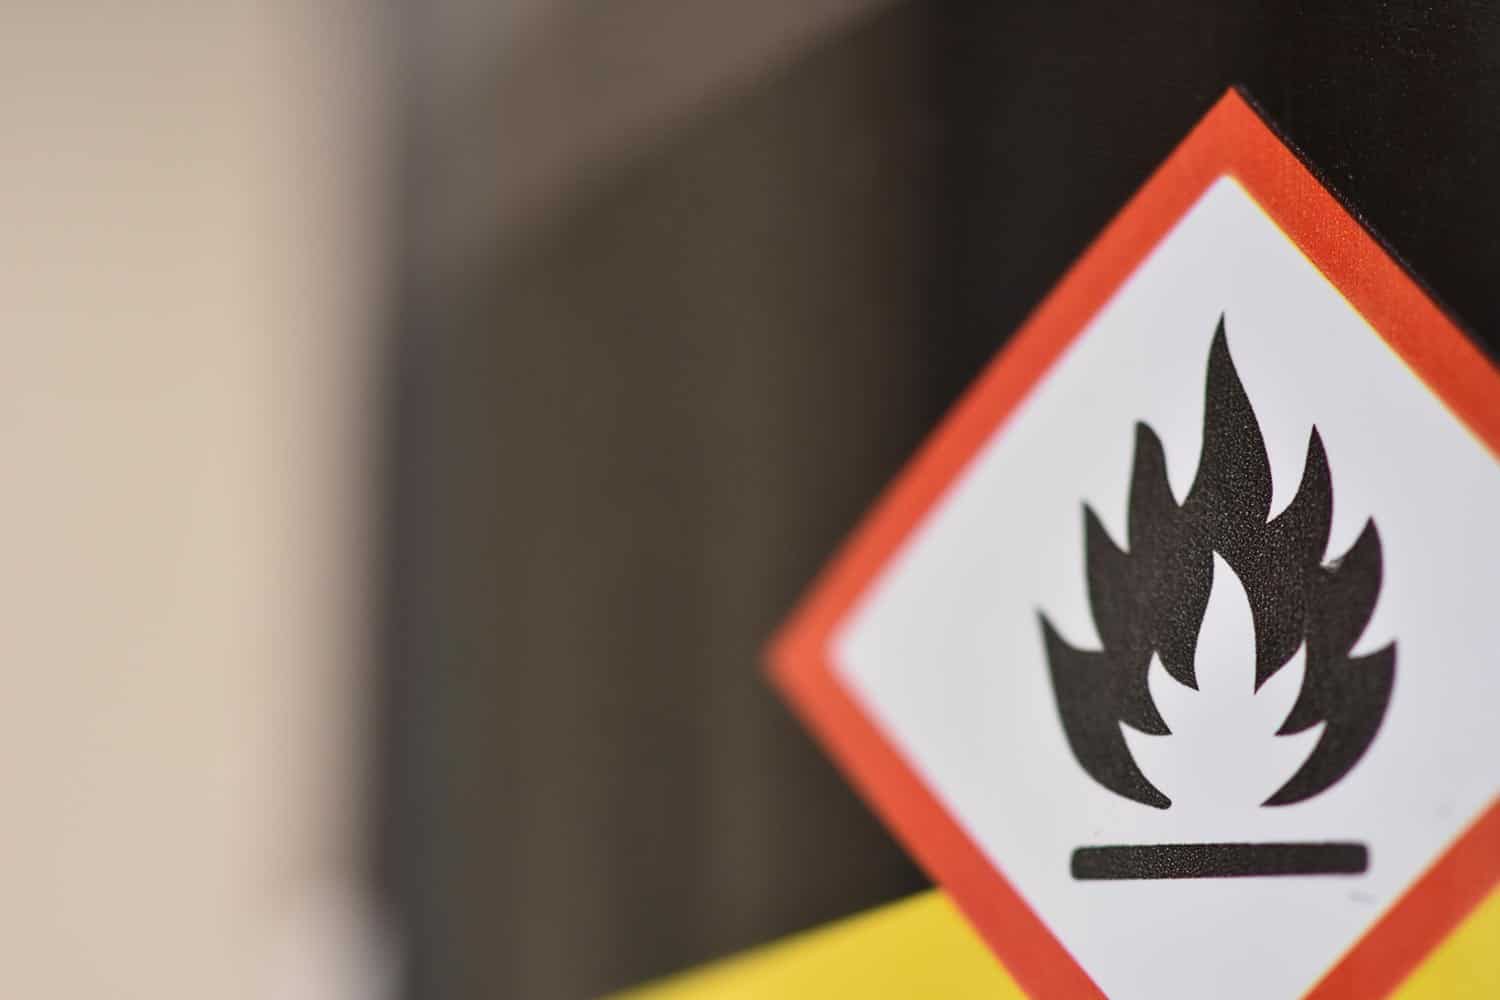 A flammable sign